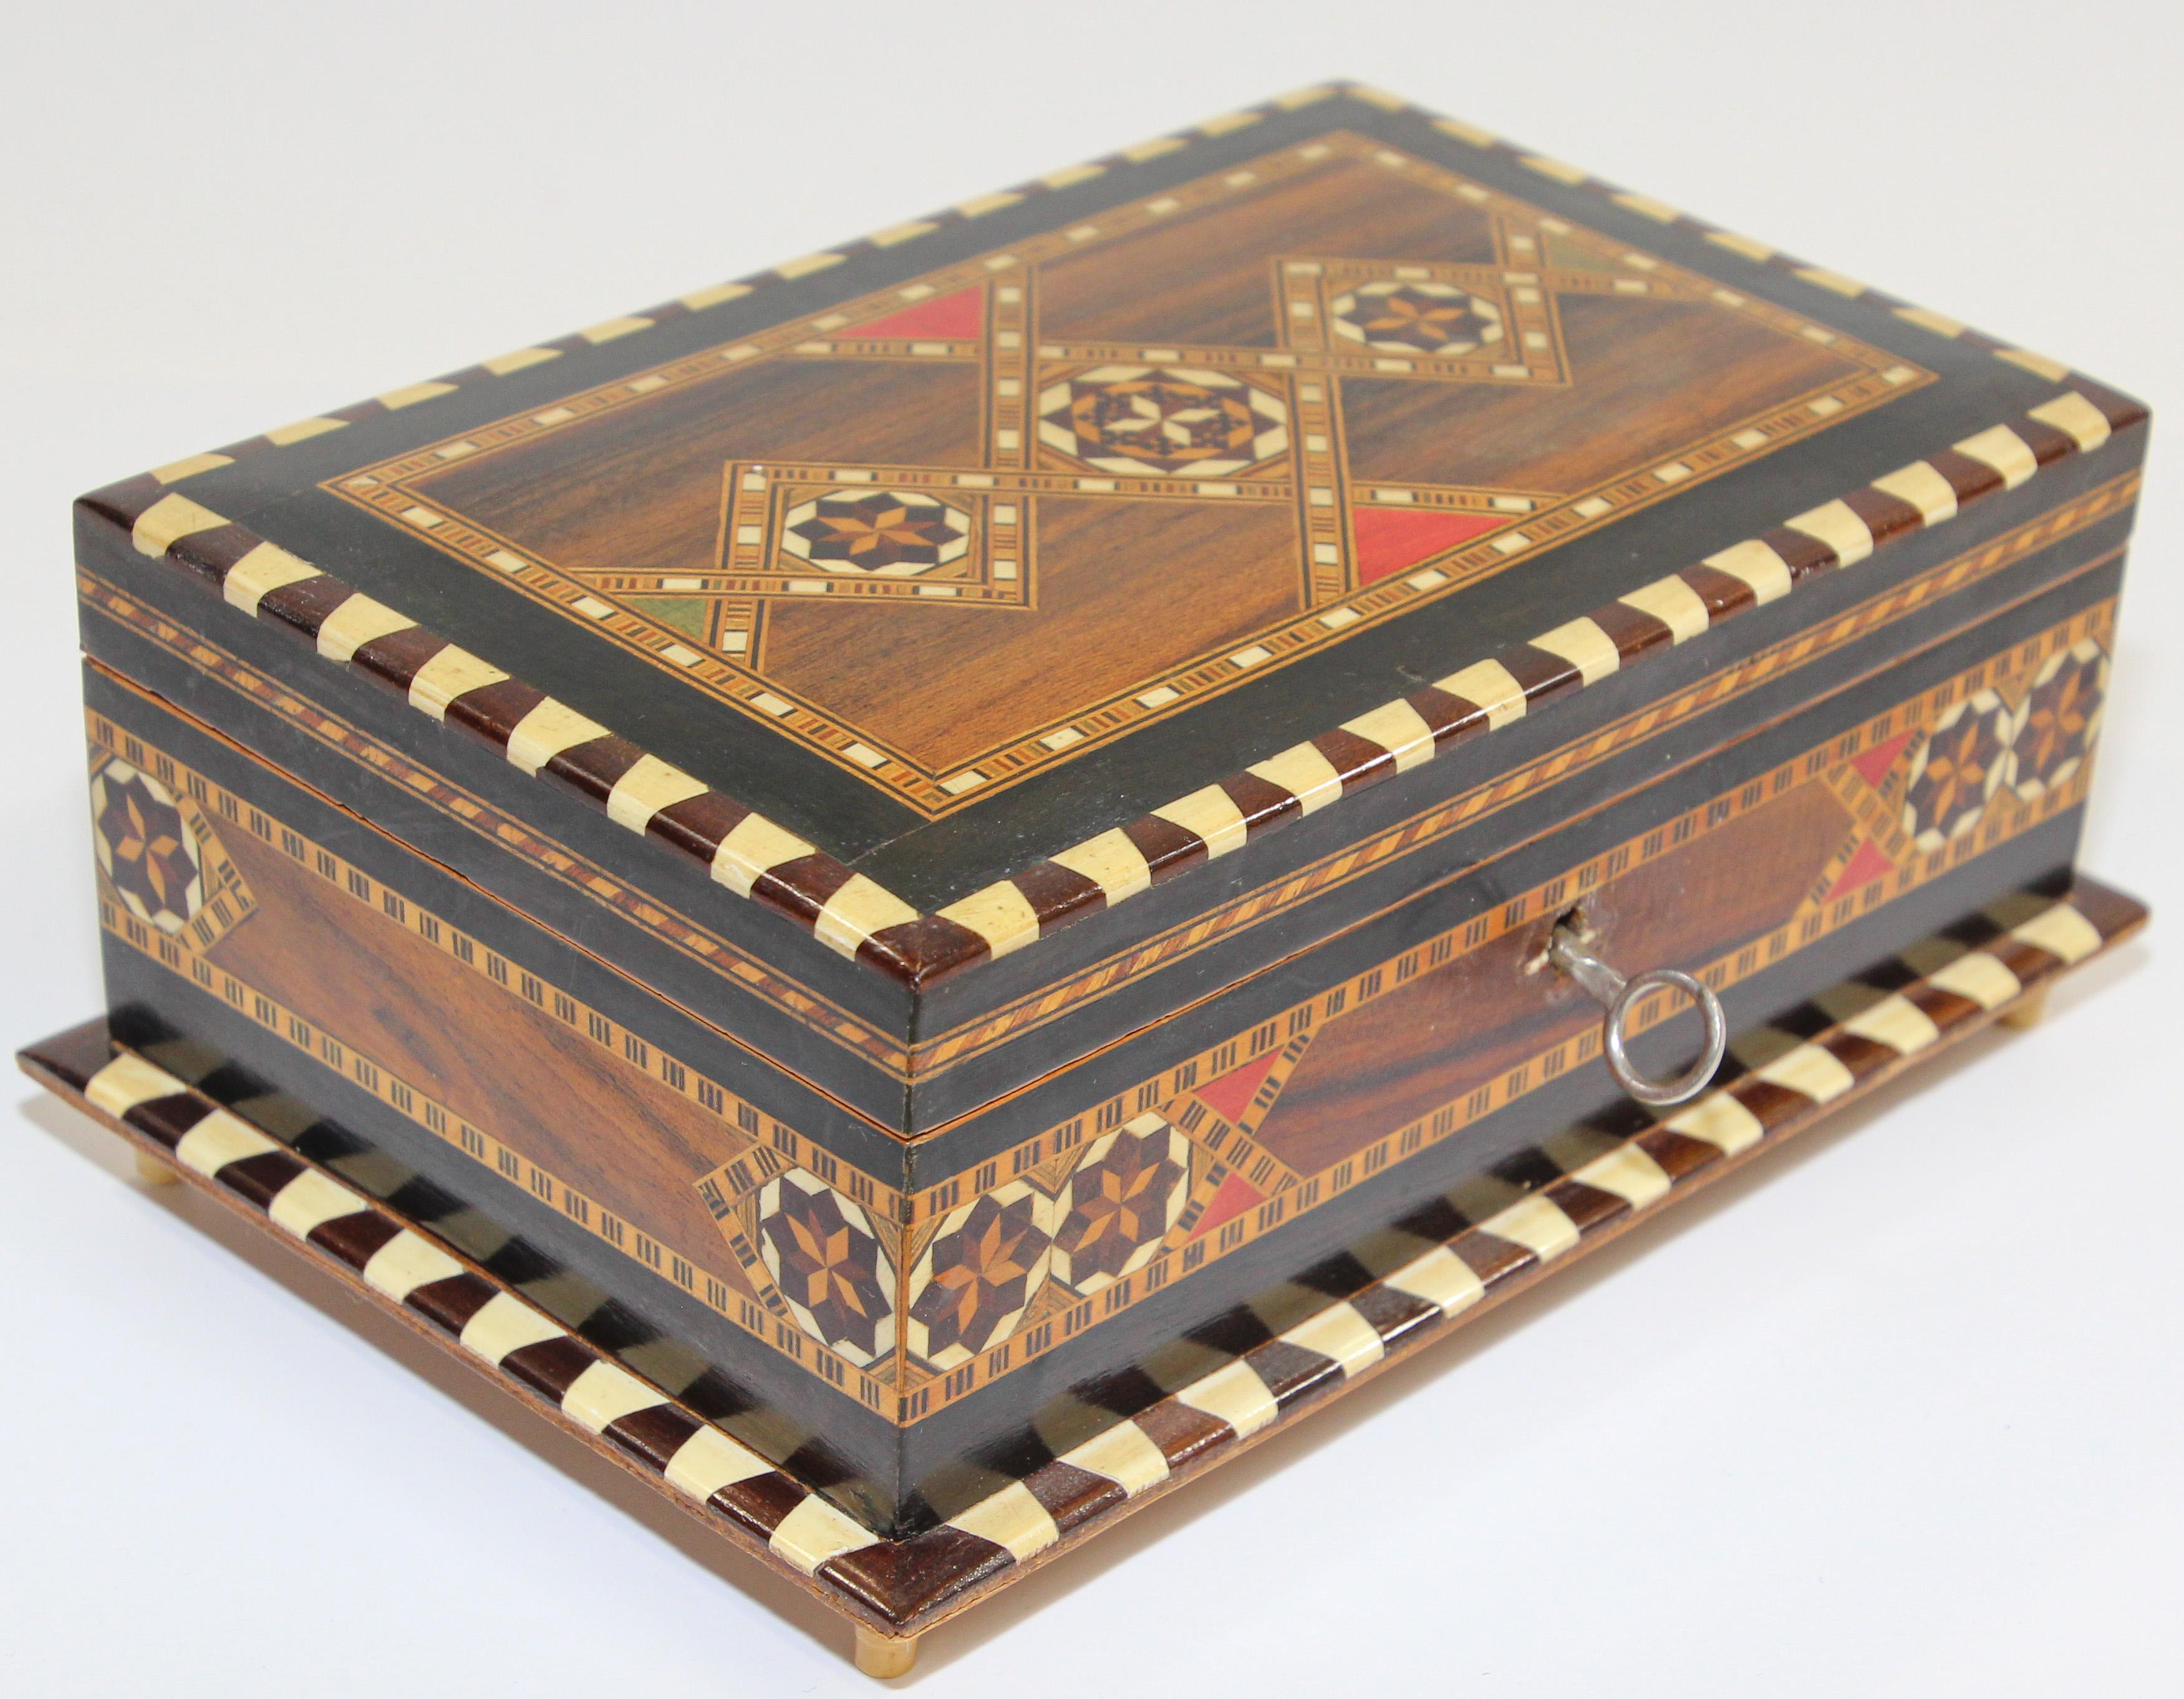 Spanish inlaid Marquetry trinket footed box, cigarette box.
Exquisite handcrafted Middle Eastern mosaic marquetry inlaid walnut wood box.
Handcrafted in Spain in the Moorish Syrian style with original key red velvet lined.
Decorative box